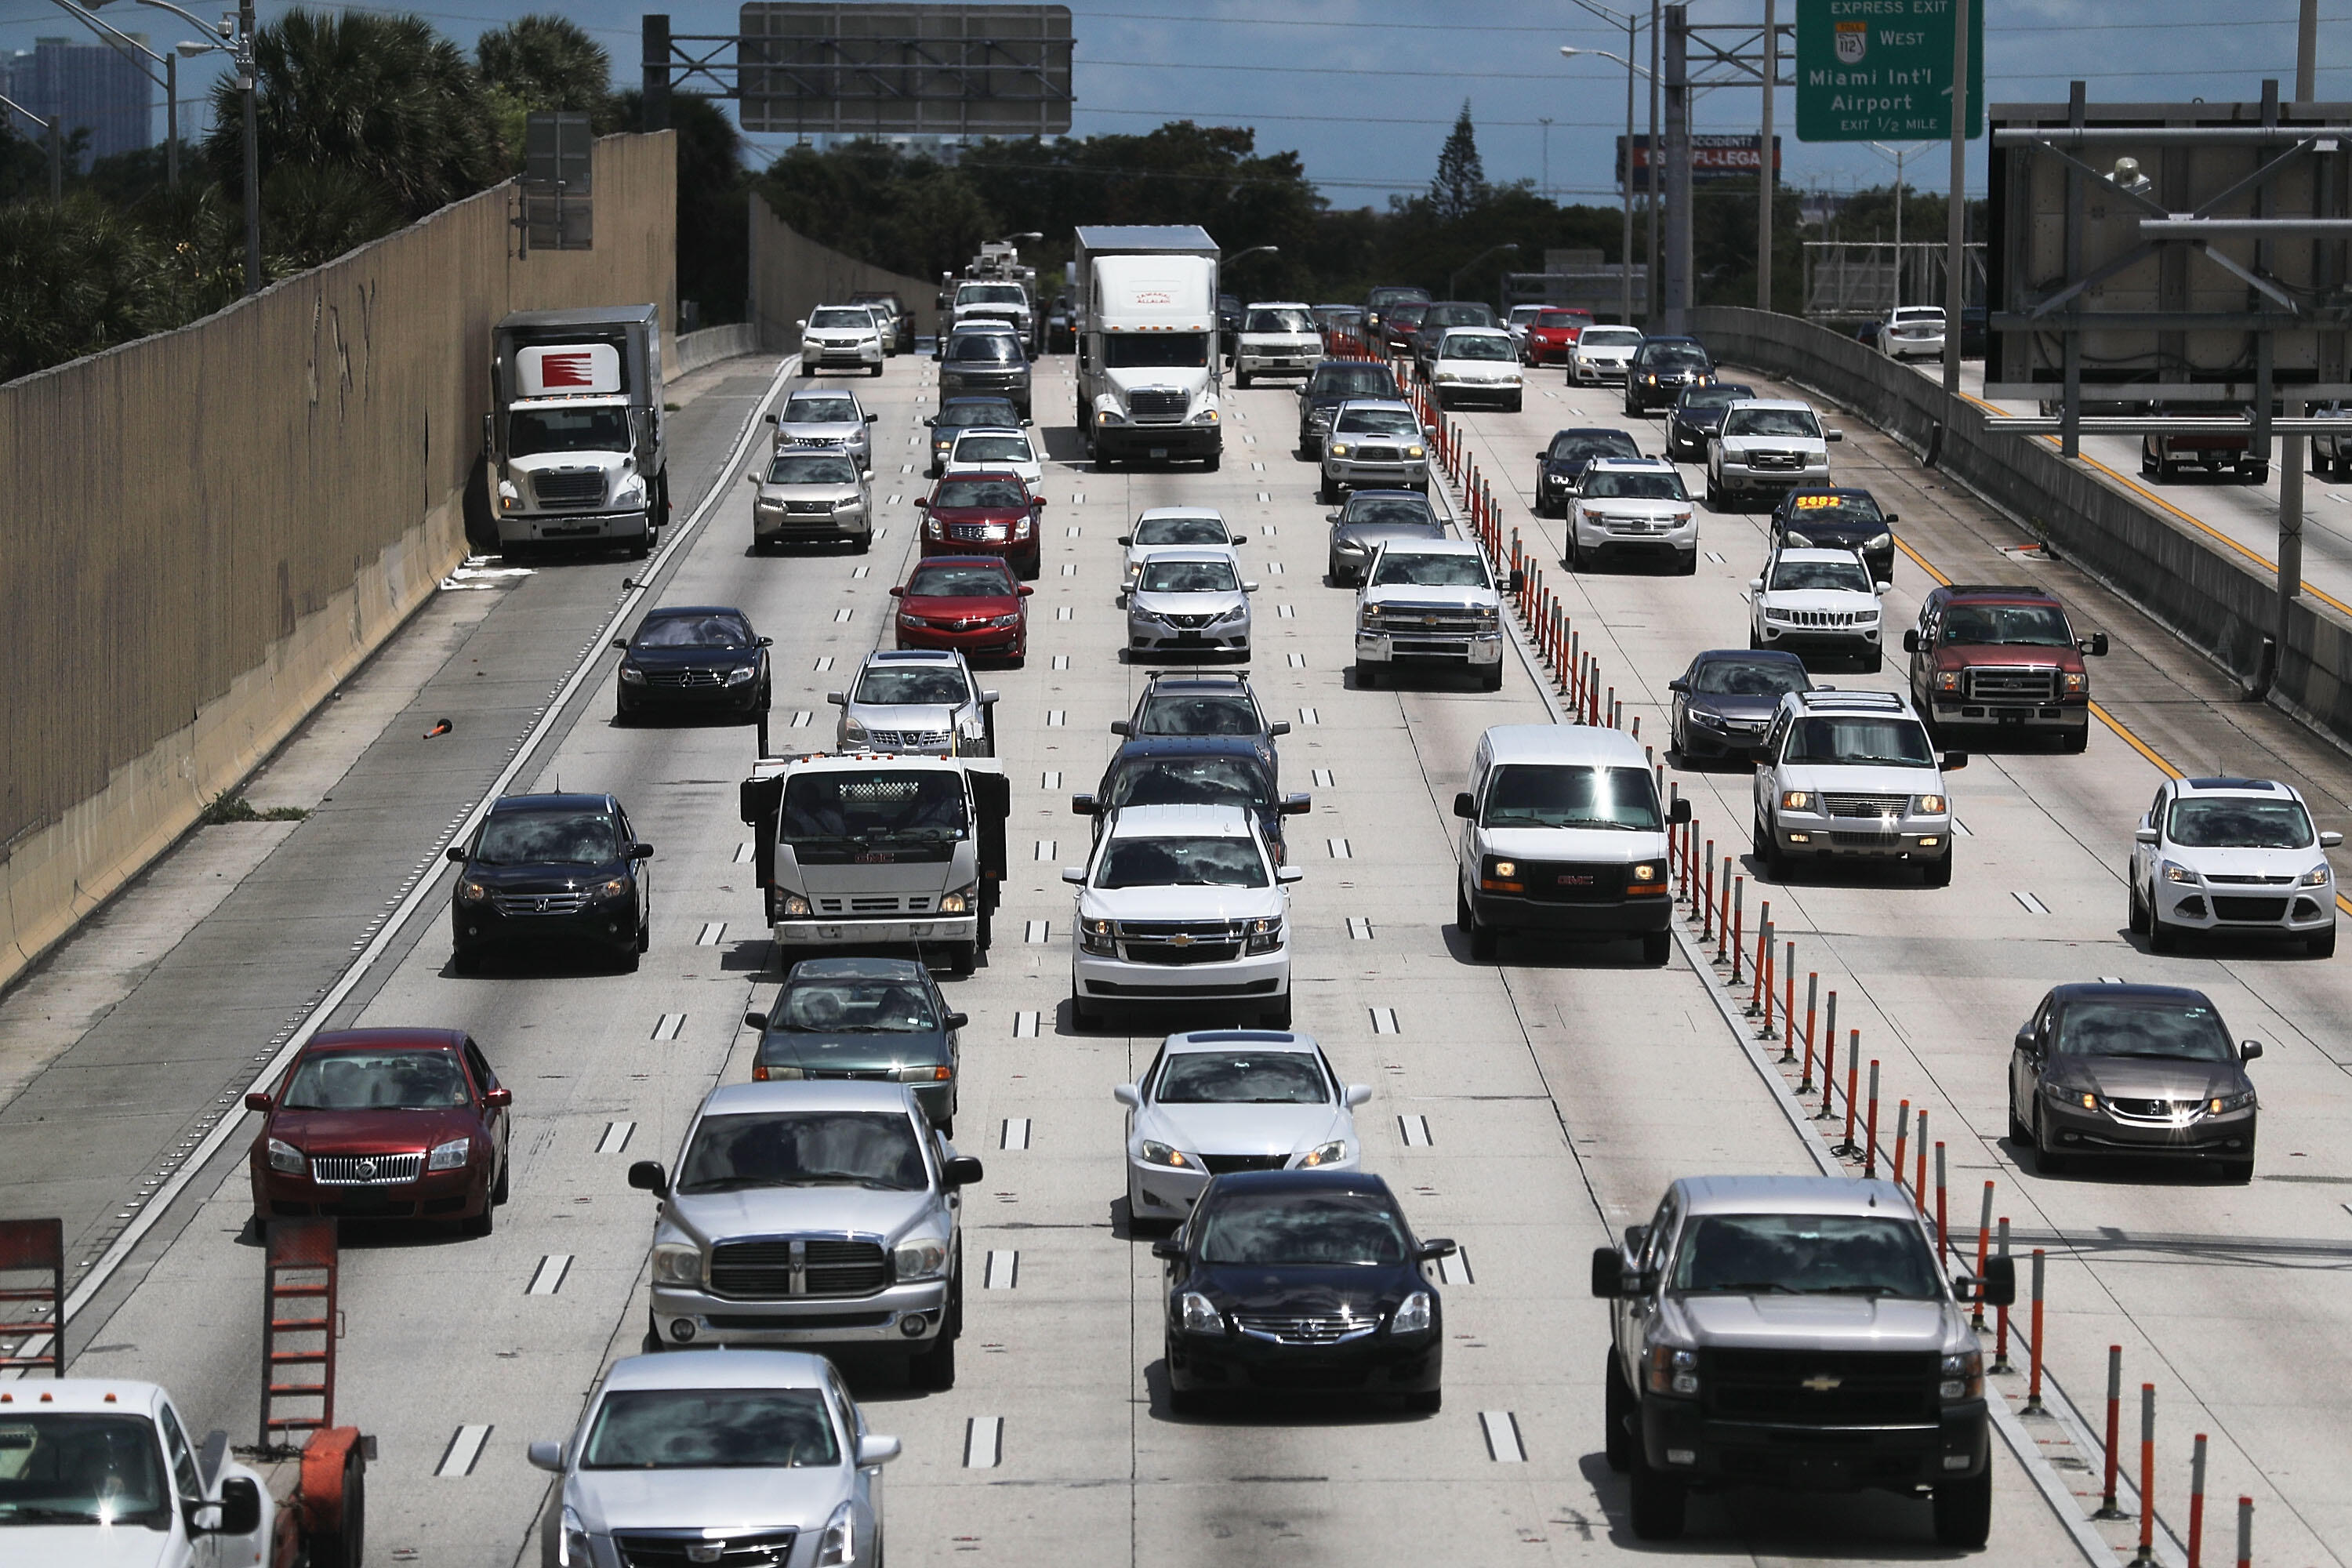 MIAMI, FL - MAY 27:  Vehicle traffic is seen on I-95 as people prepare for the Memorial Day weekend on May 27, 2016 in Miami, Florida.  AAA is predicting 34 million Americans will drive 50 miles or more for Memorial Day weekend, the most since 2005.  (Pho